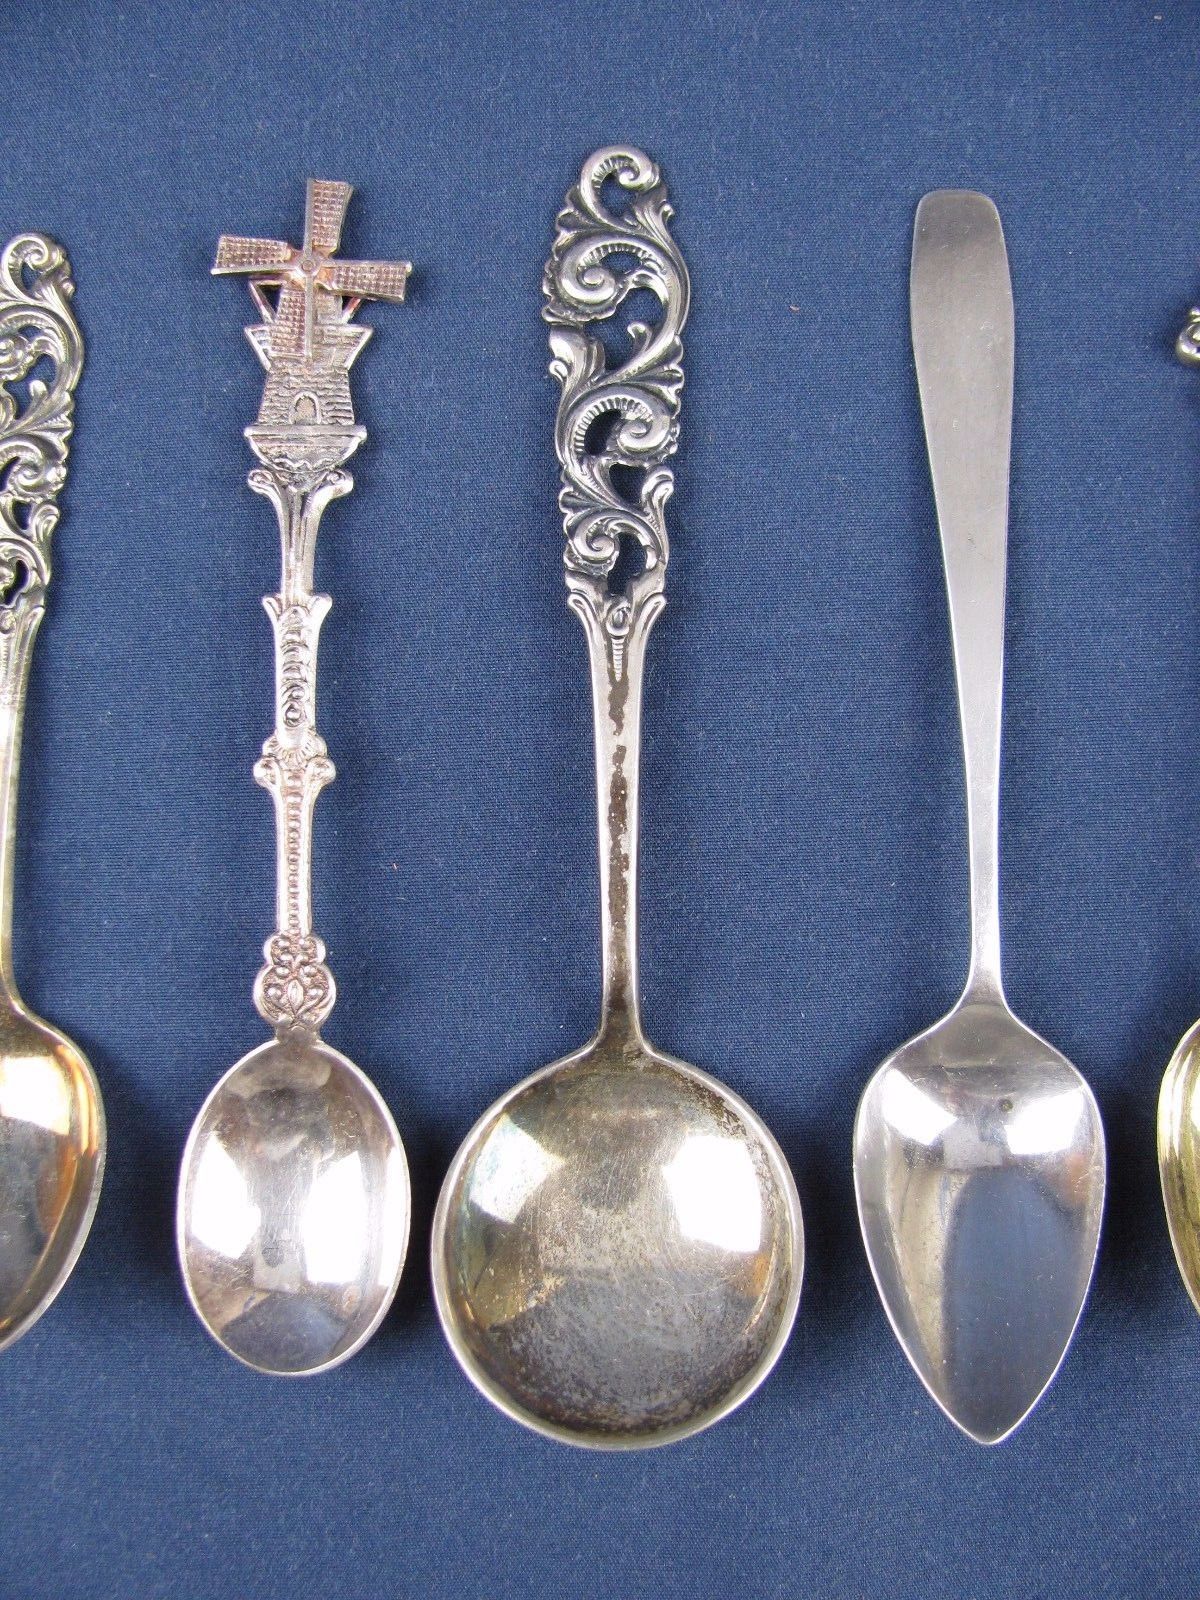 8 Various Silver Spoons - .830 - .835 - .900 - .925 Silver Content ...